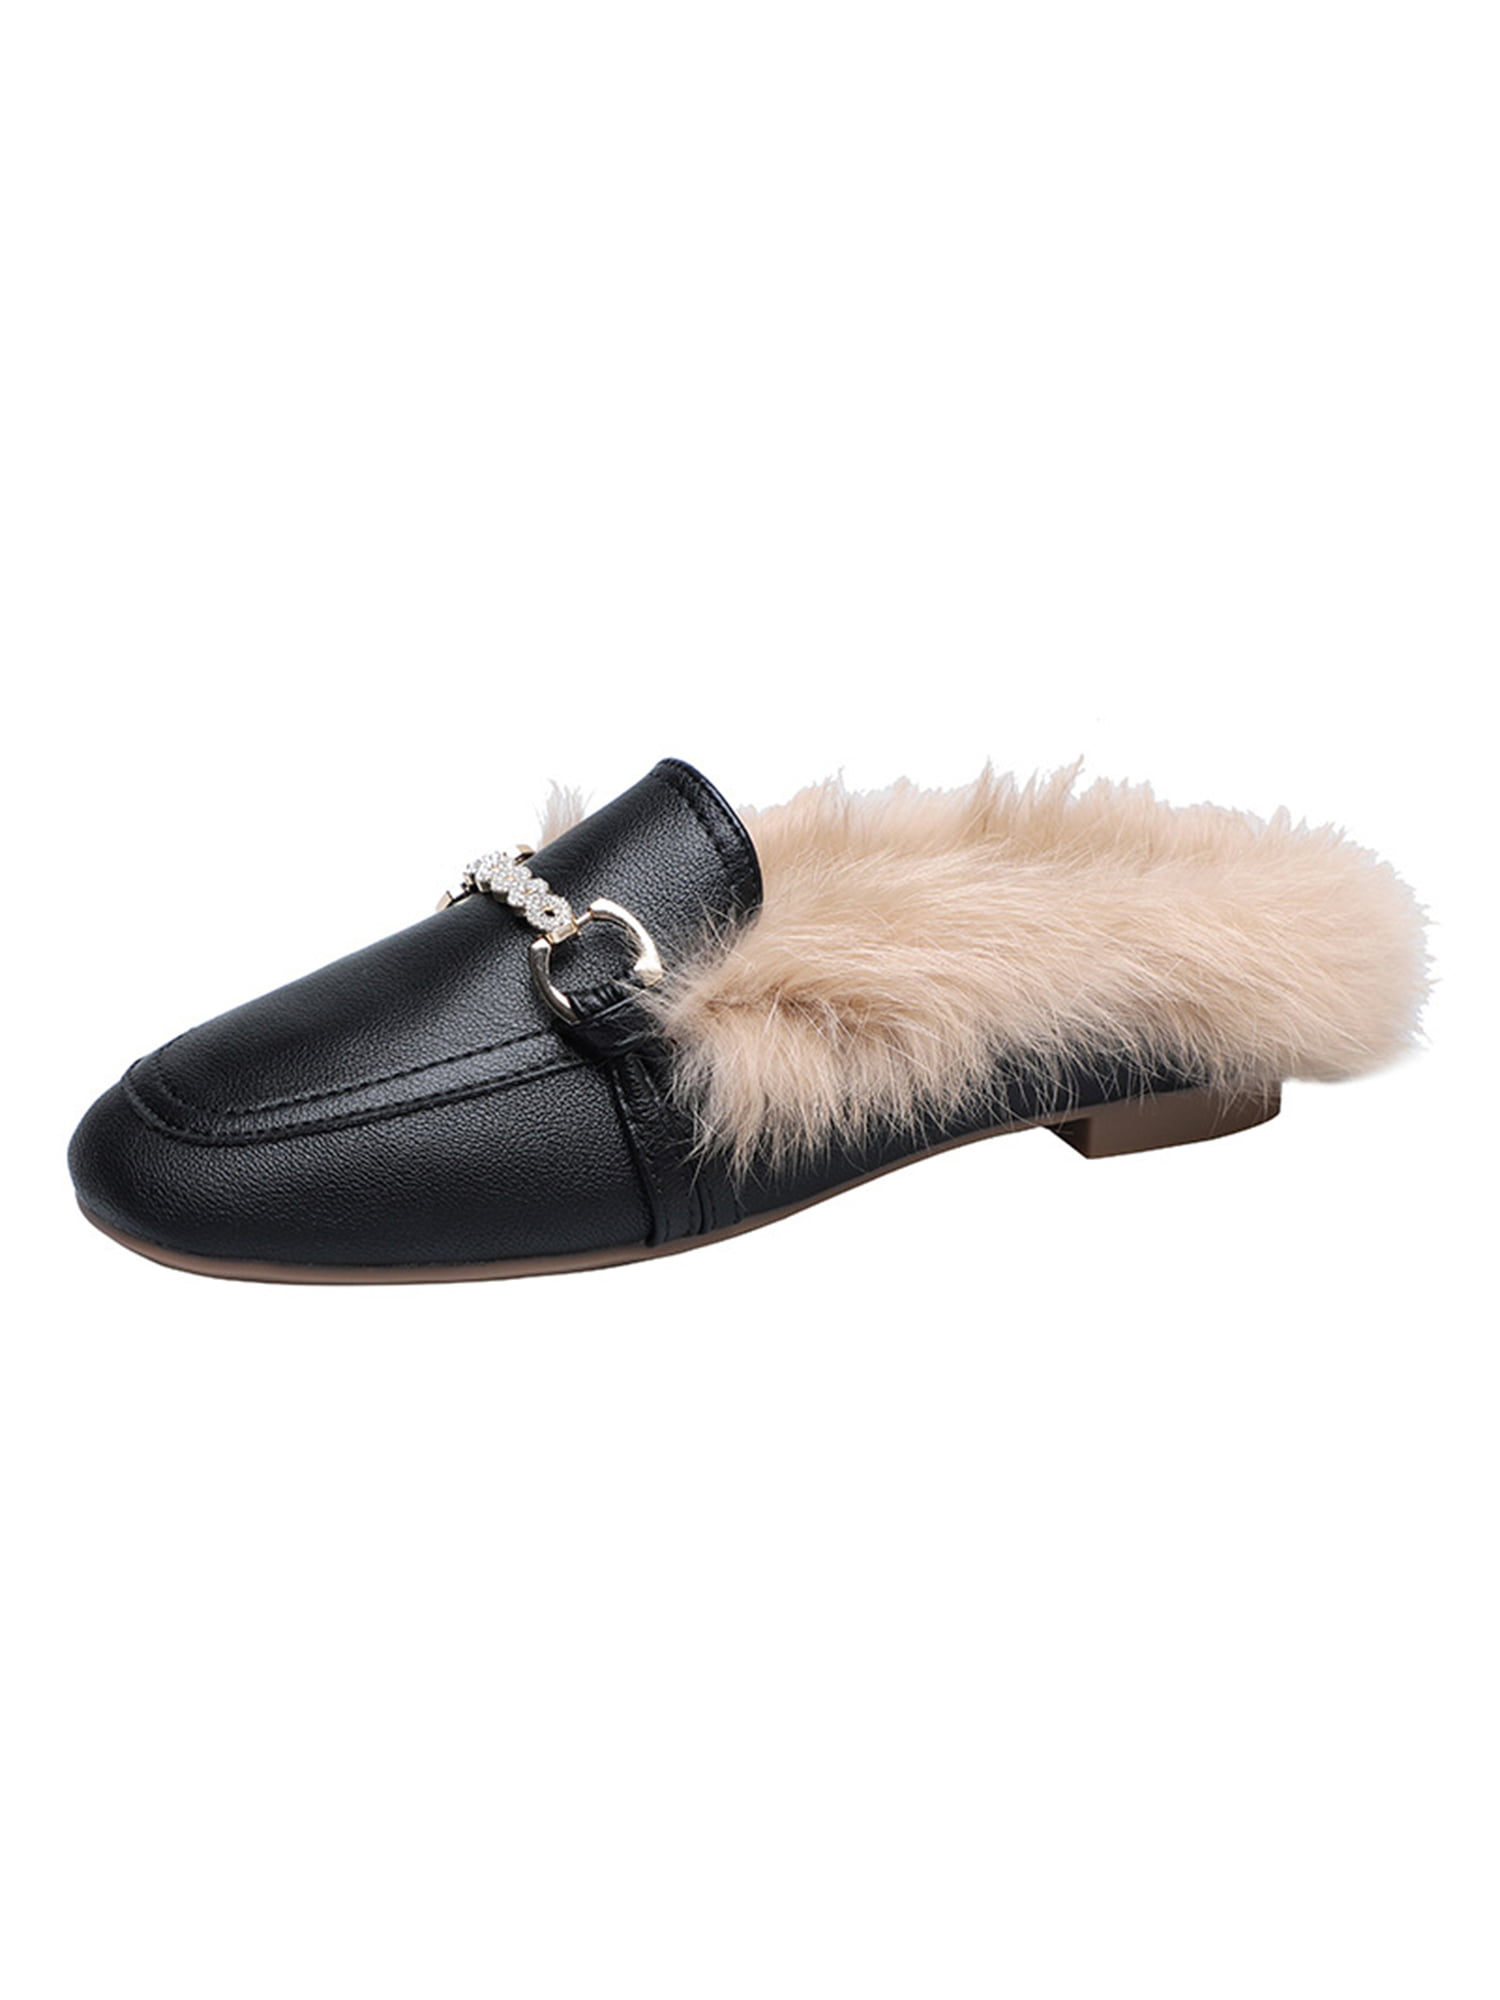 Ladies Womens Slip On Backless Faux Fur Mule Slippes with Star Design 